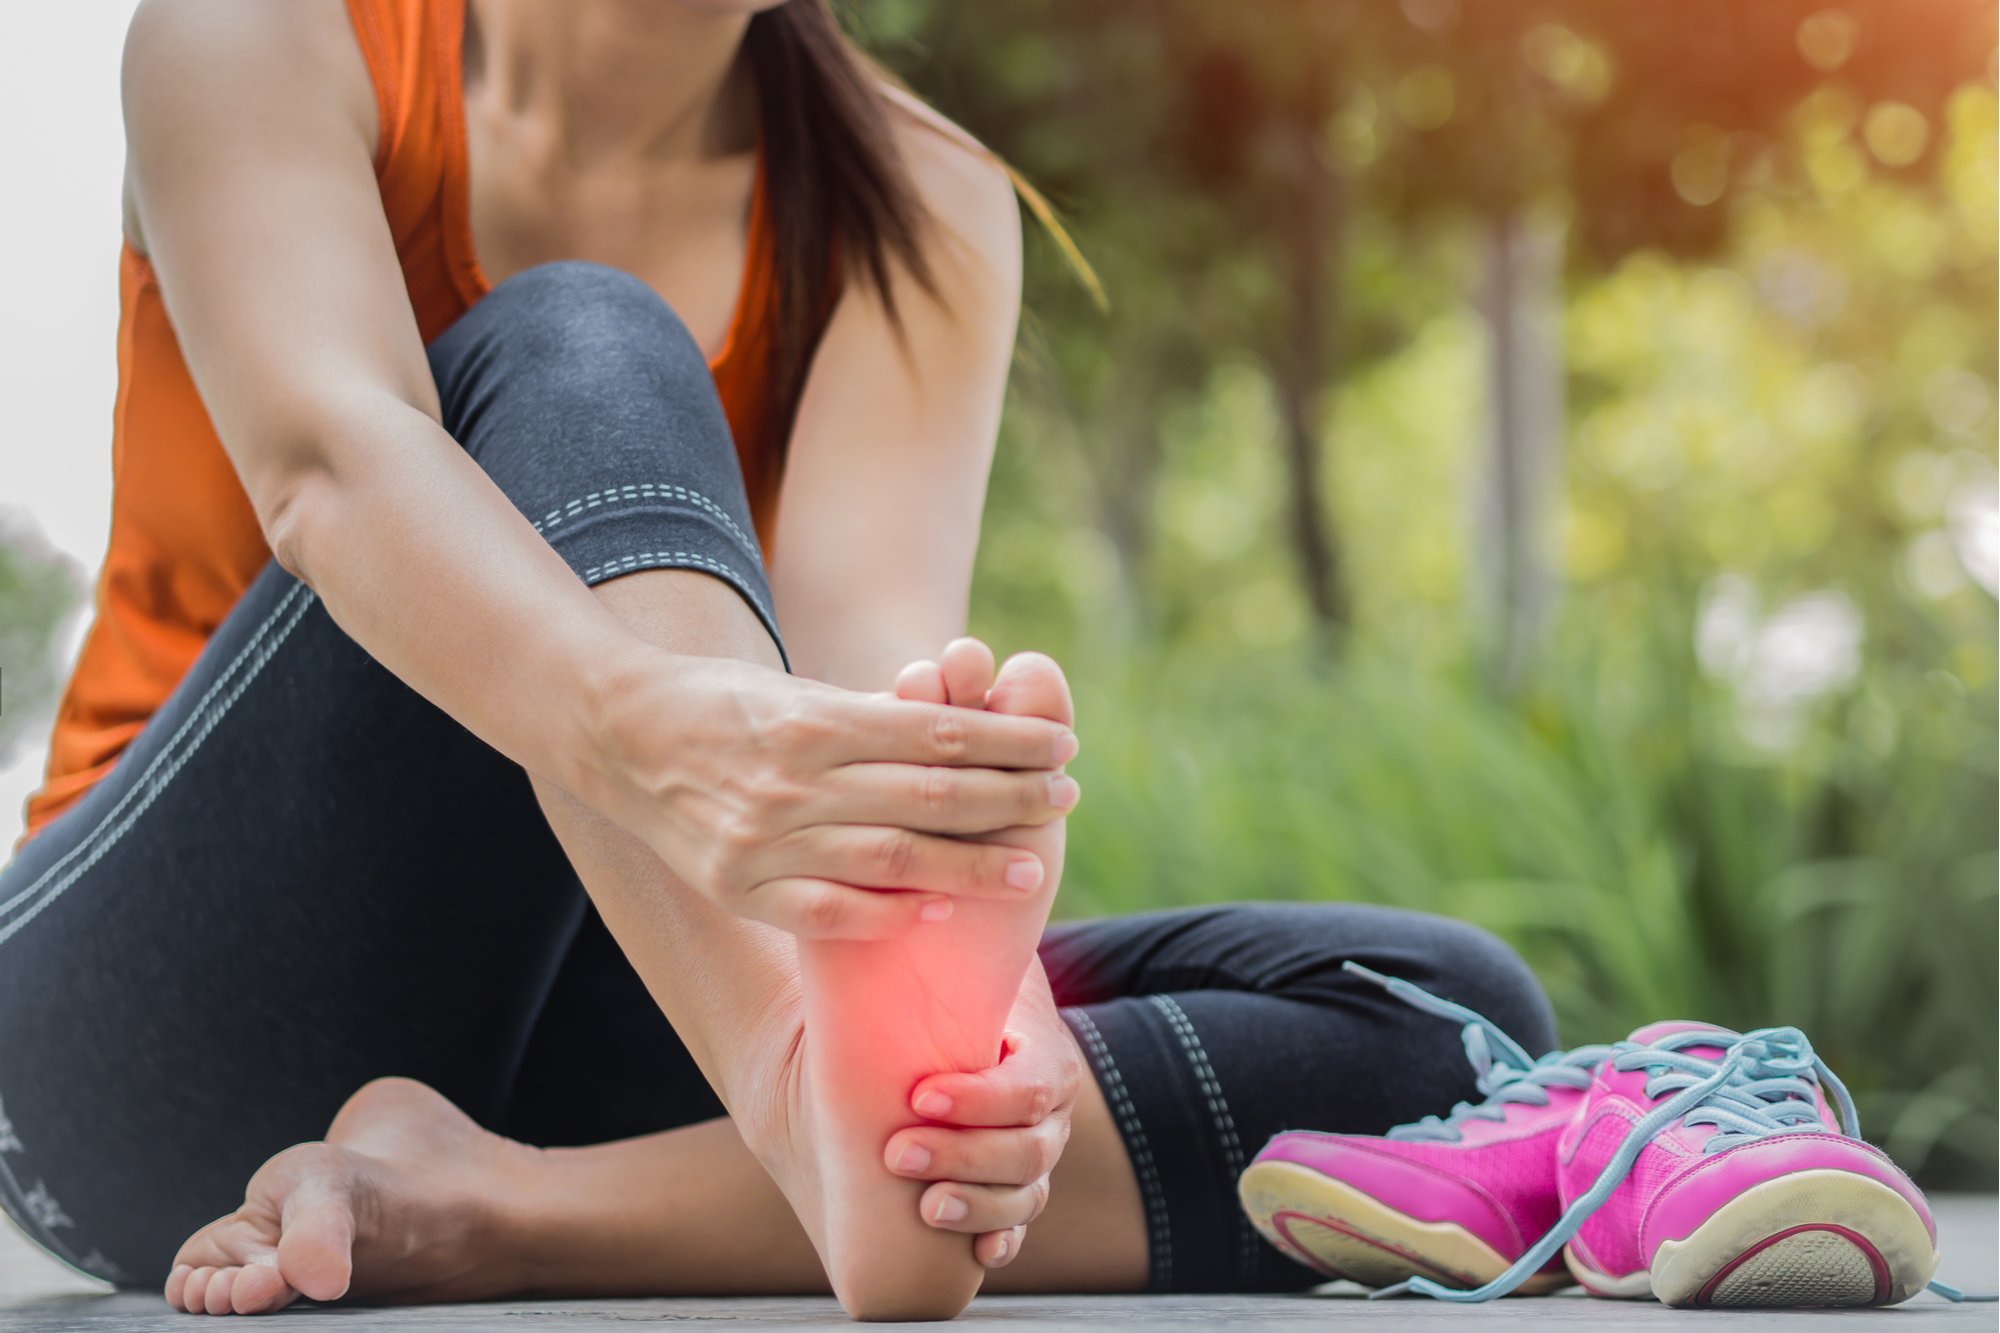 3 exercises to help improve foot pain with plantar fasciitis - pt Health